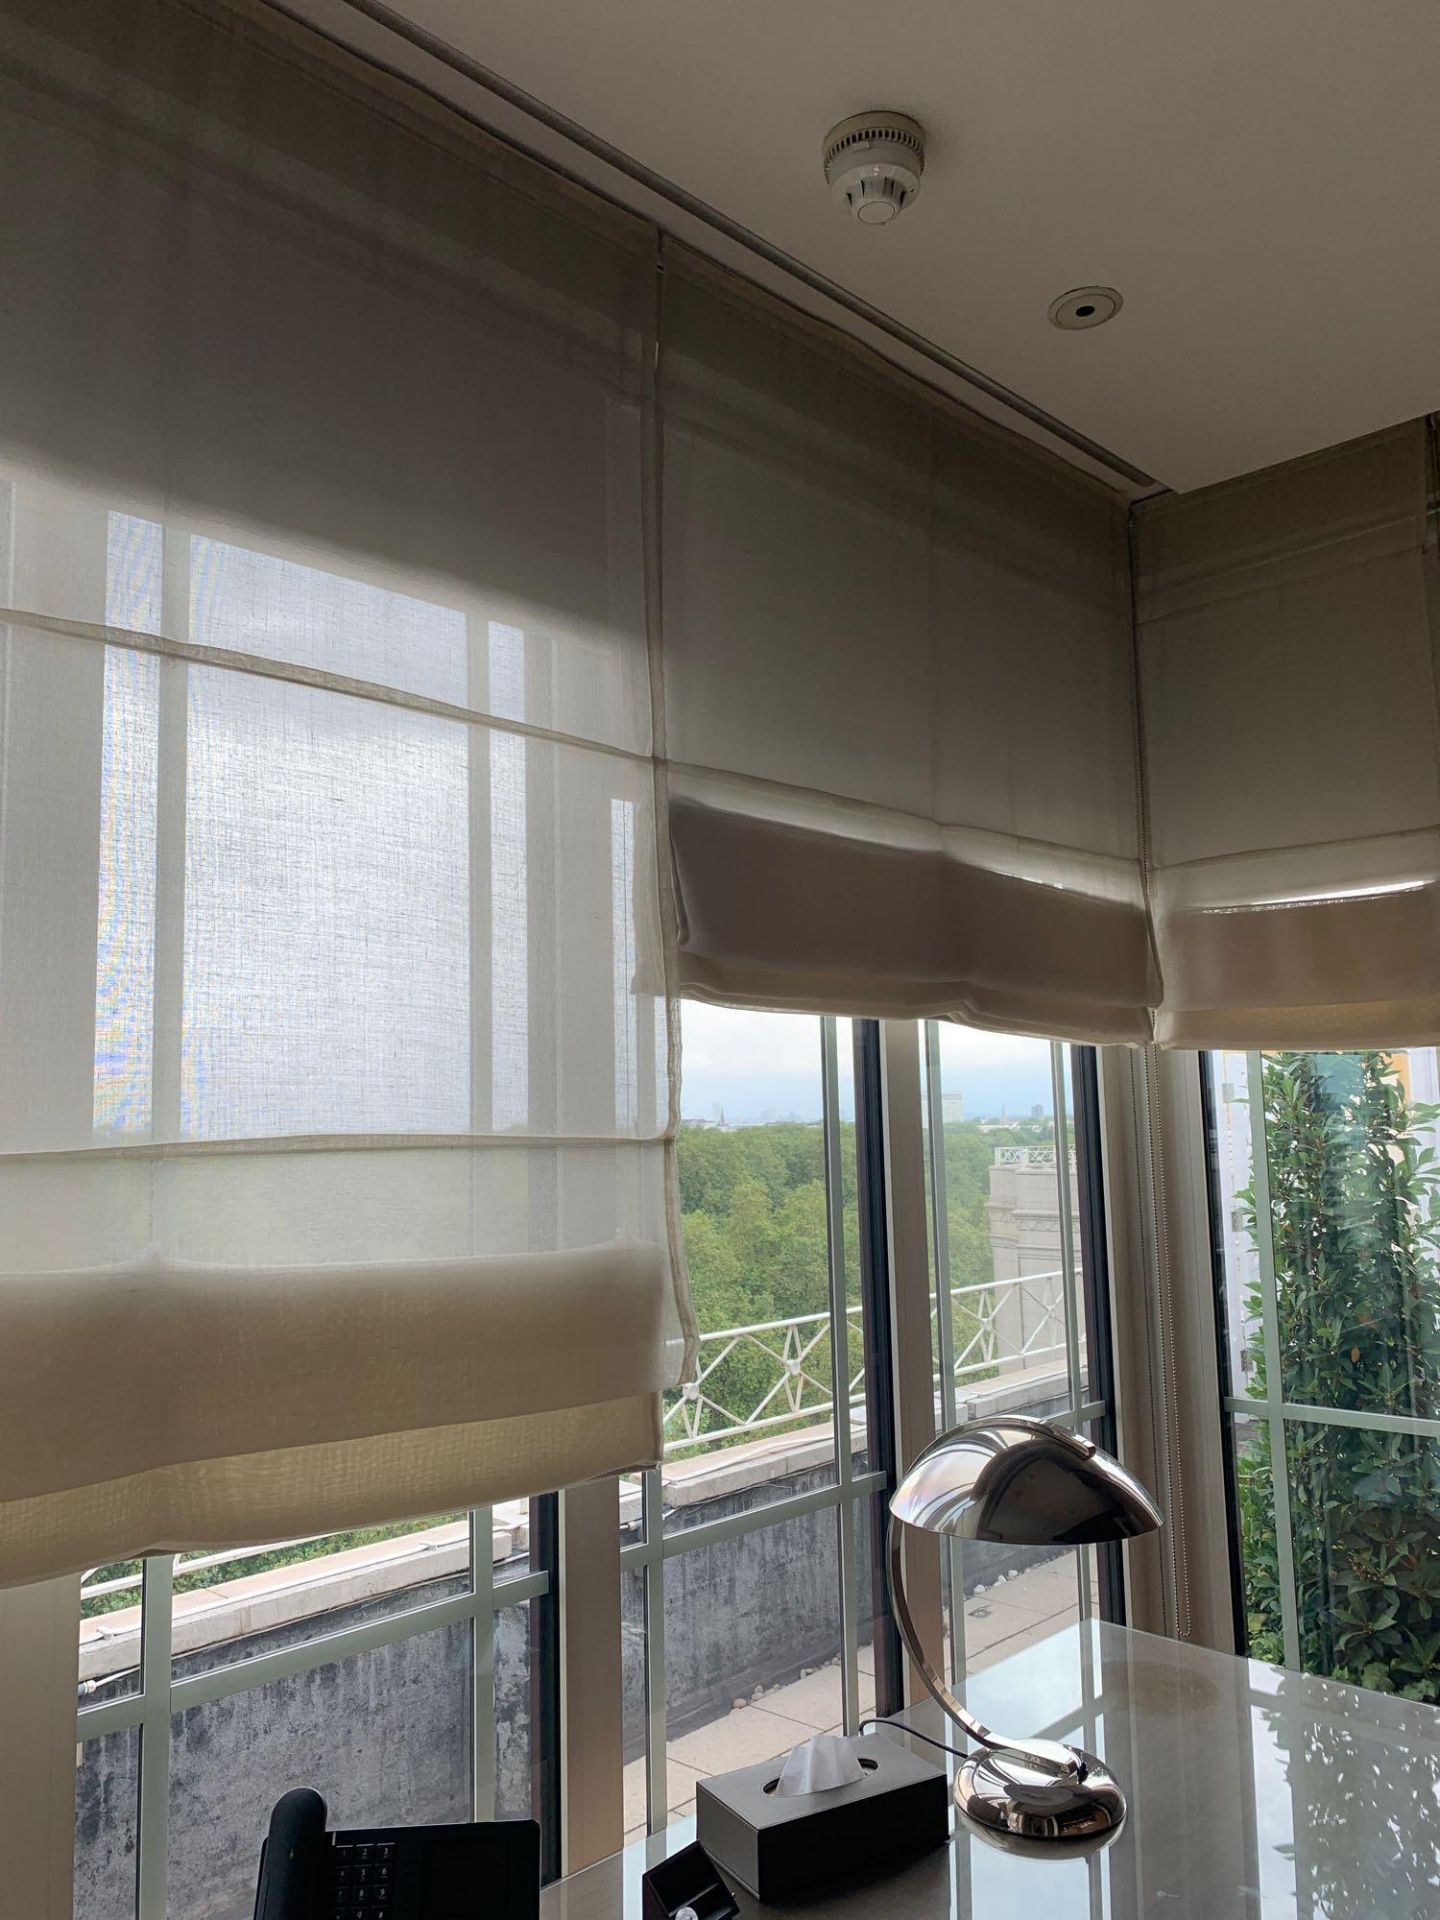 A Set Of 4 Cream Blinds In Tiered Fabric Dimensions Of 2 Side/Smaller Blinds: 54 x 30 Drop - Image 3 of 4